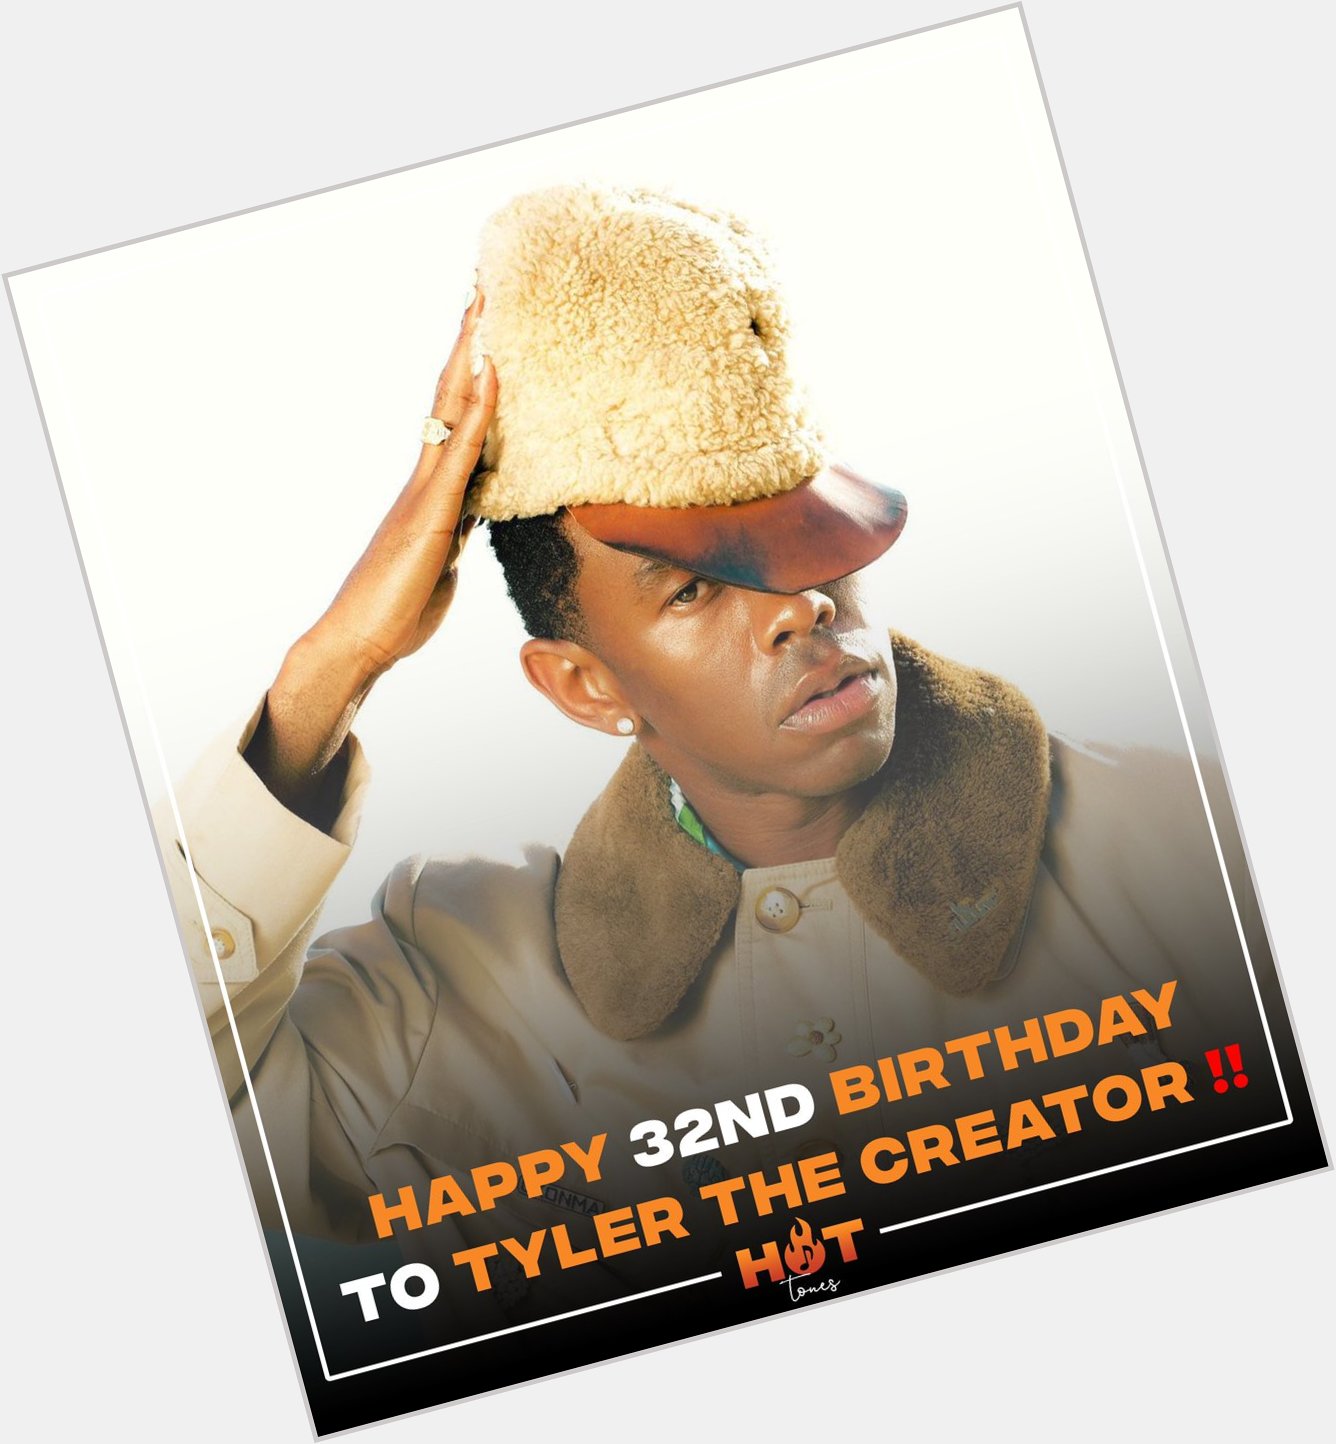 Happy 32nd birthday to Tyler The Creator  Favorite song from him  